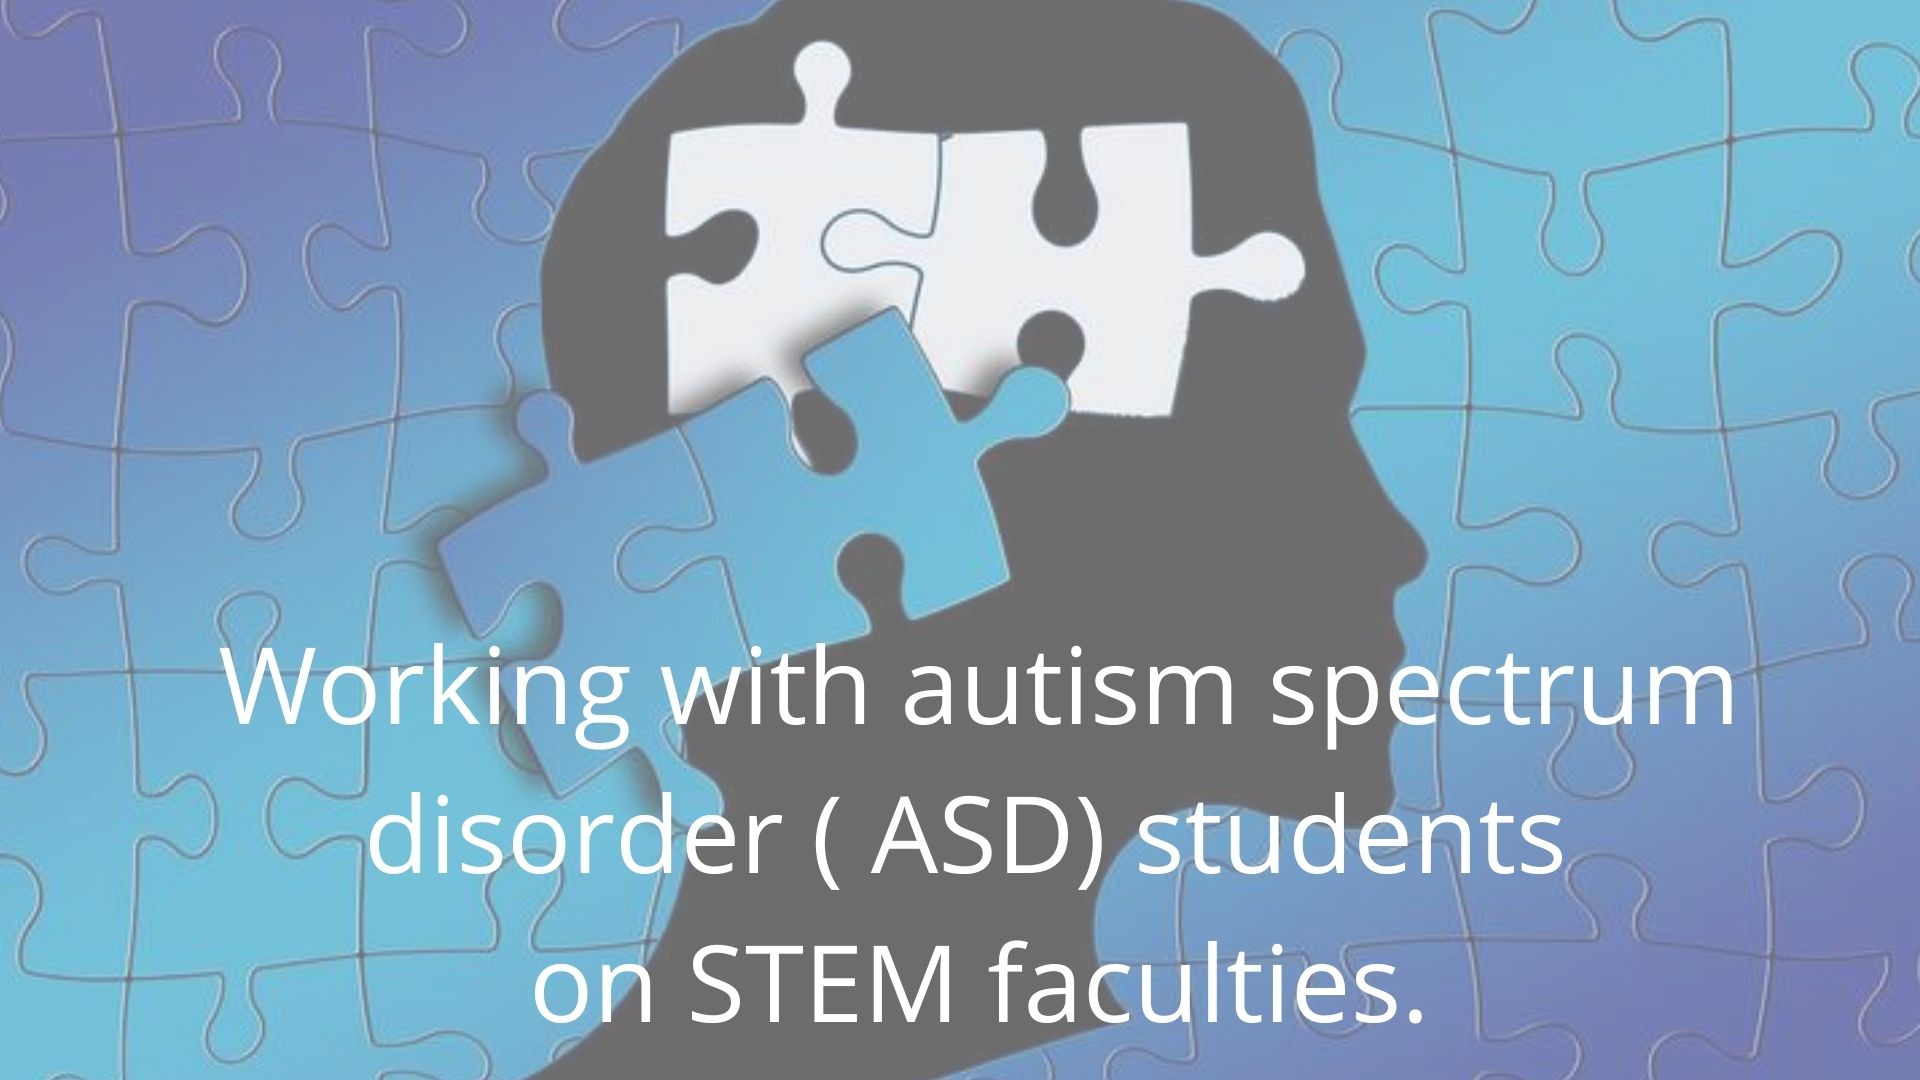 Working with autism spectrum disorder (ASD) students on STEM faculties JU07